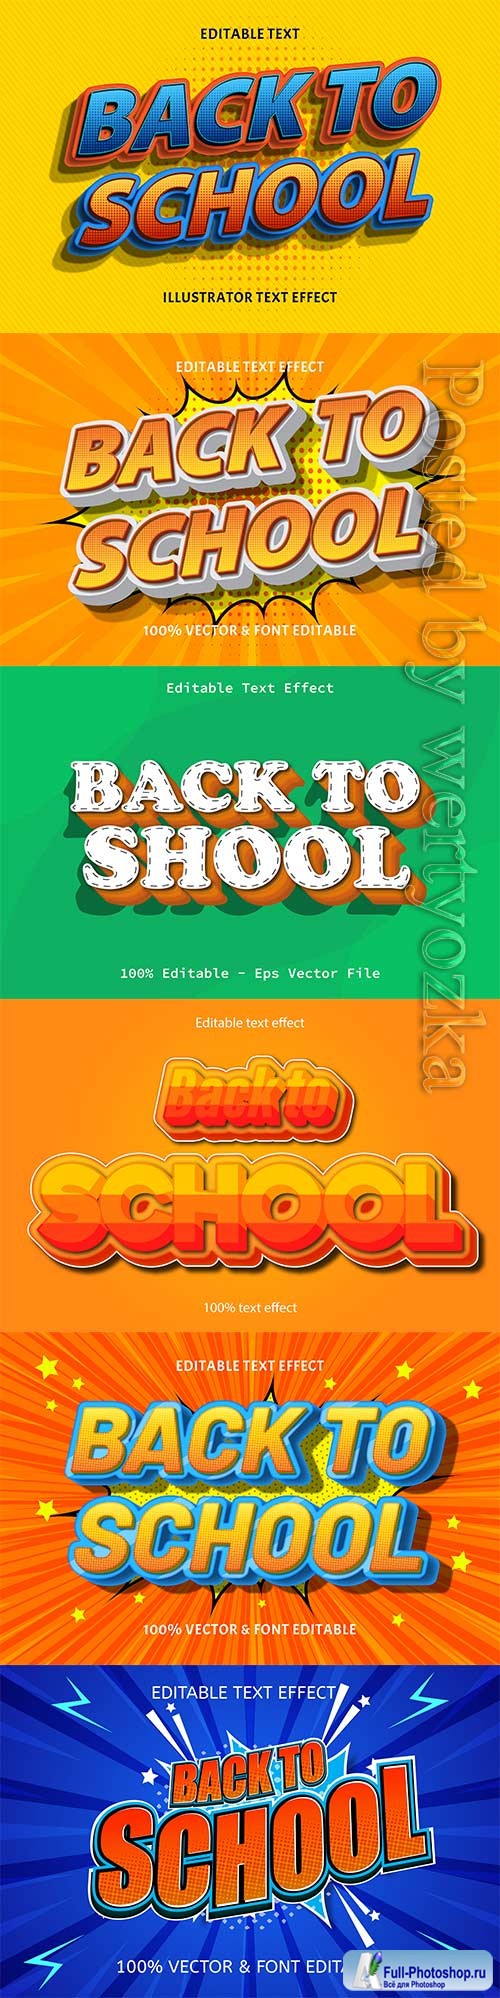 Back to school editable text effect vol 10